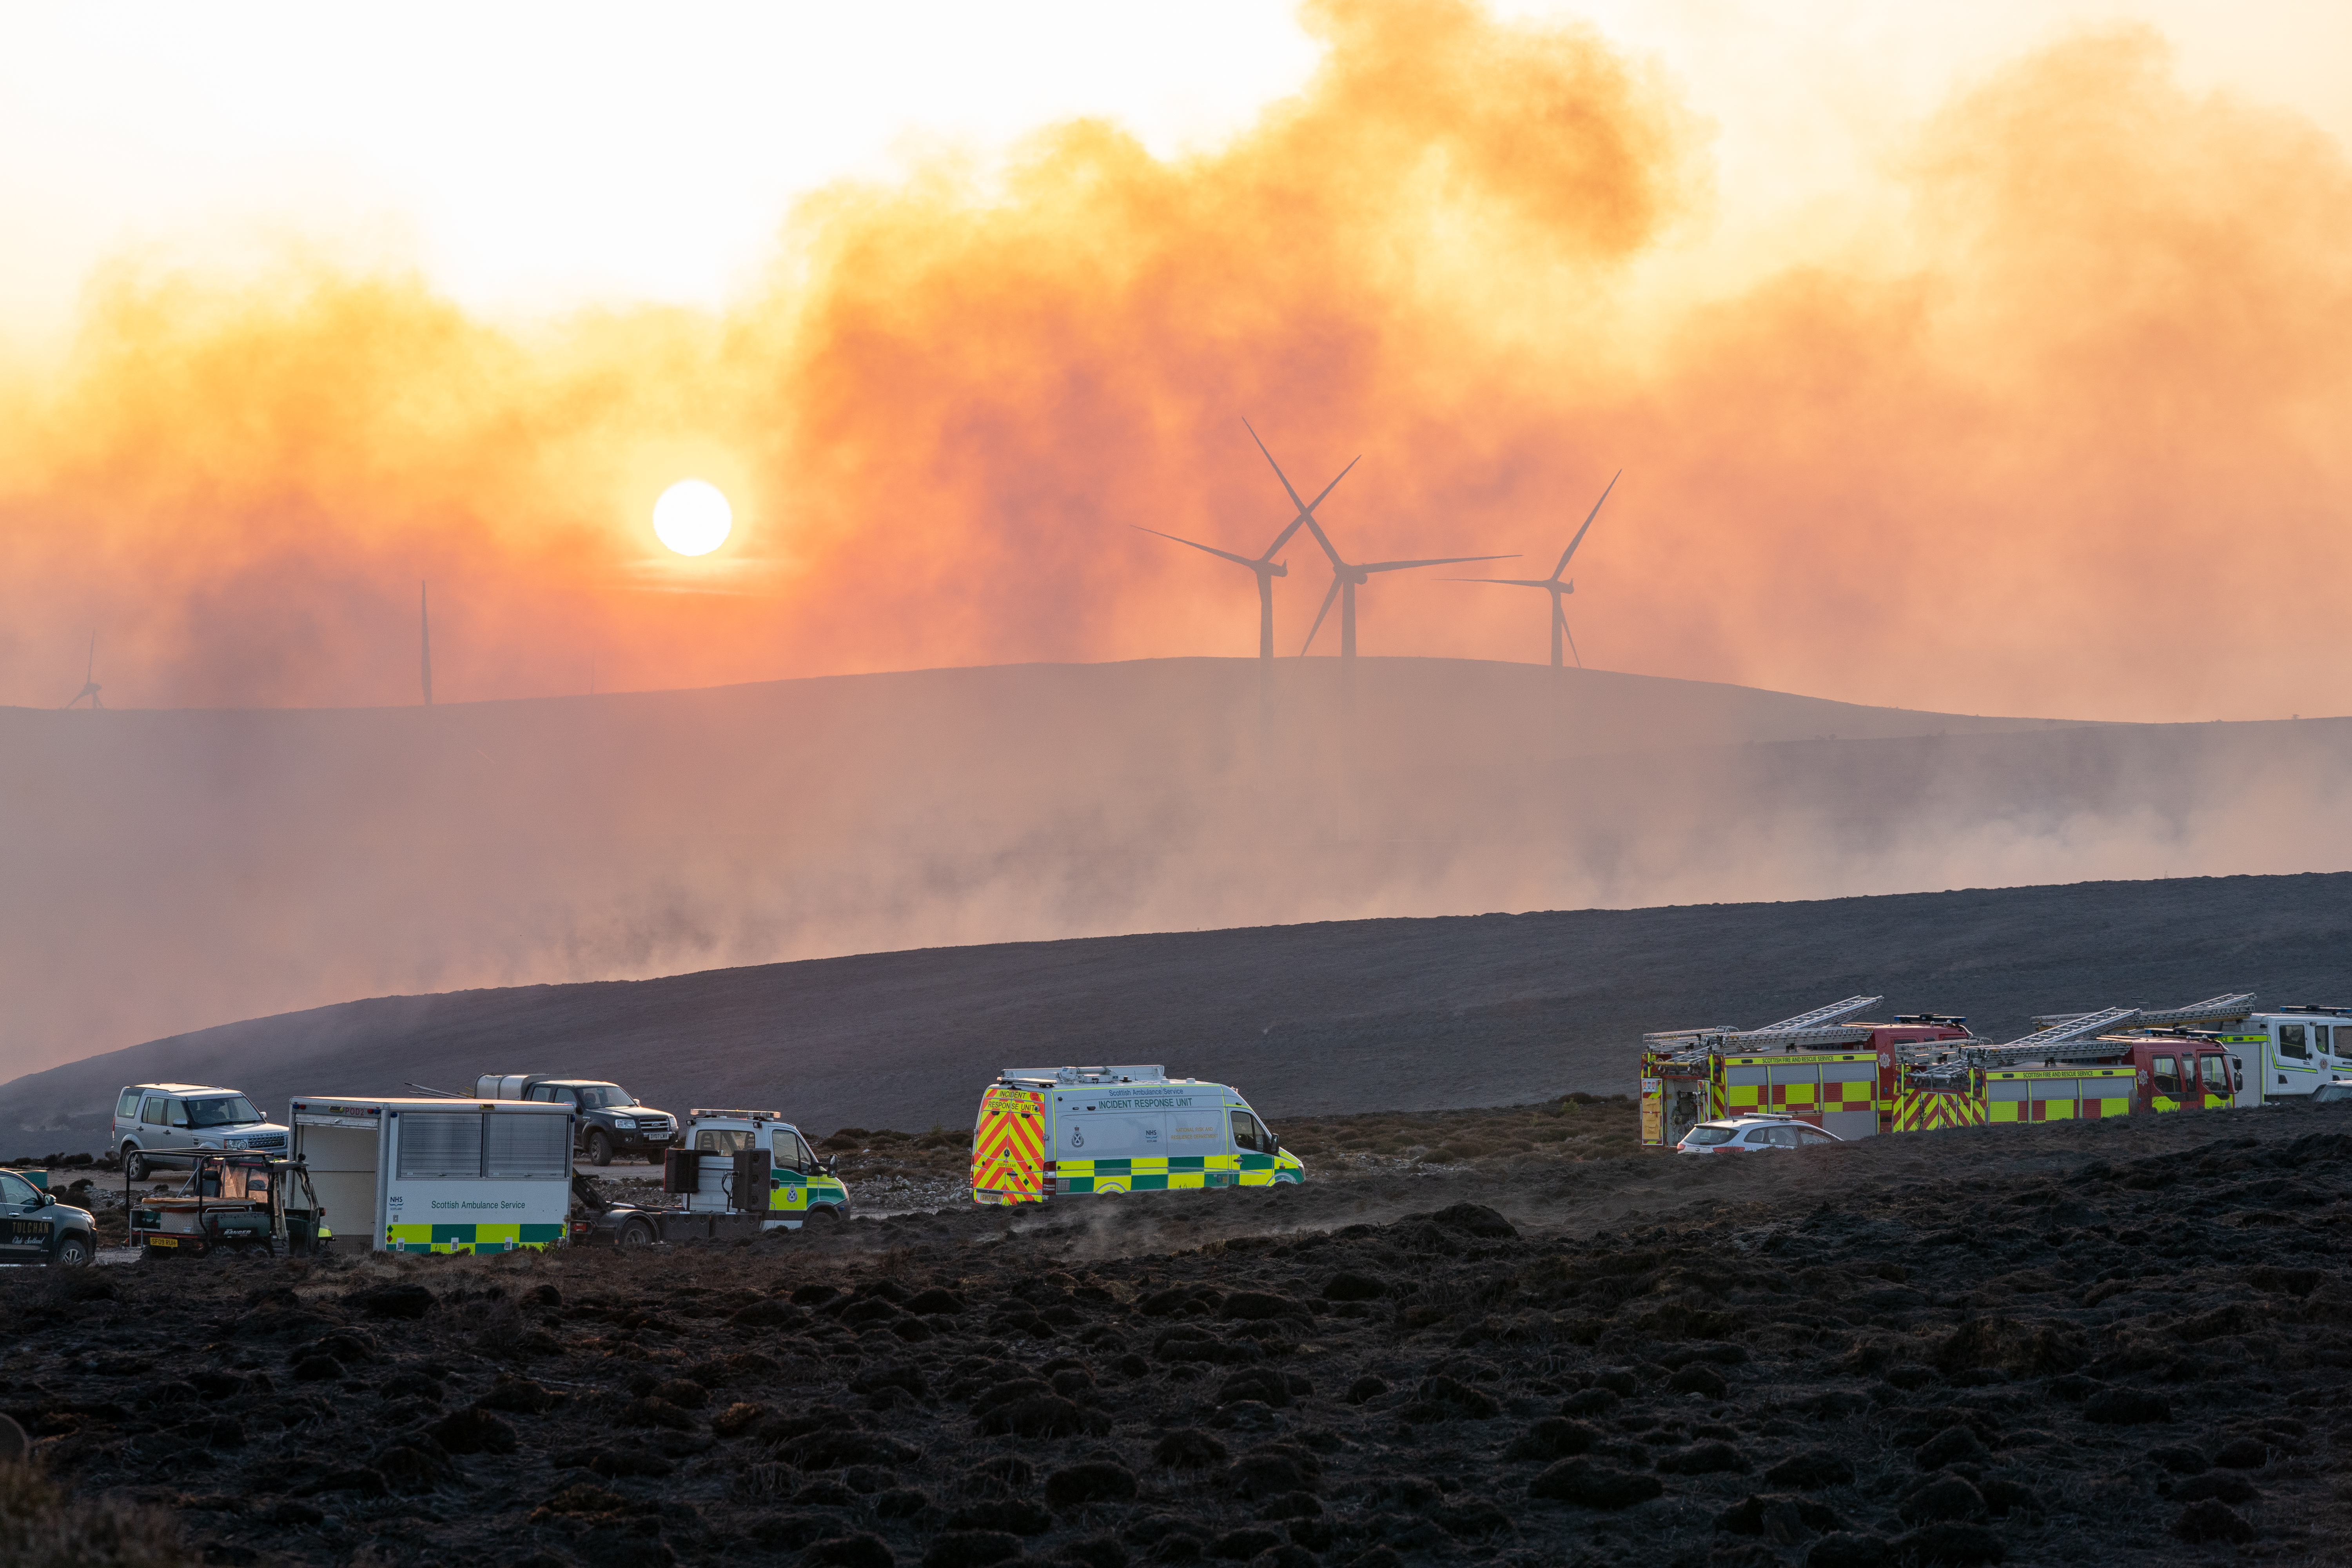 The scene of the wild fire within Ballindalloch Estate and within Pauls Hill Wind Farm, Moray.